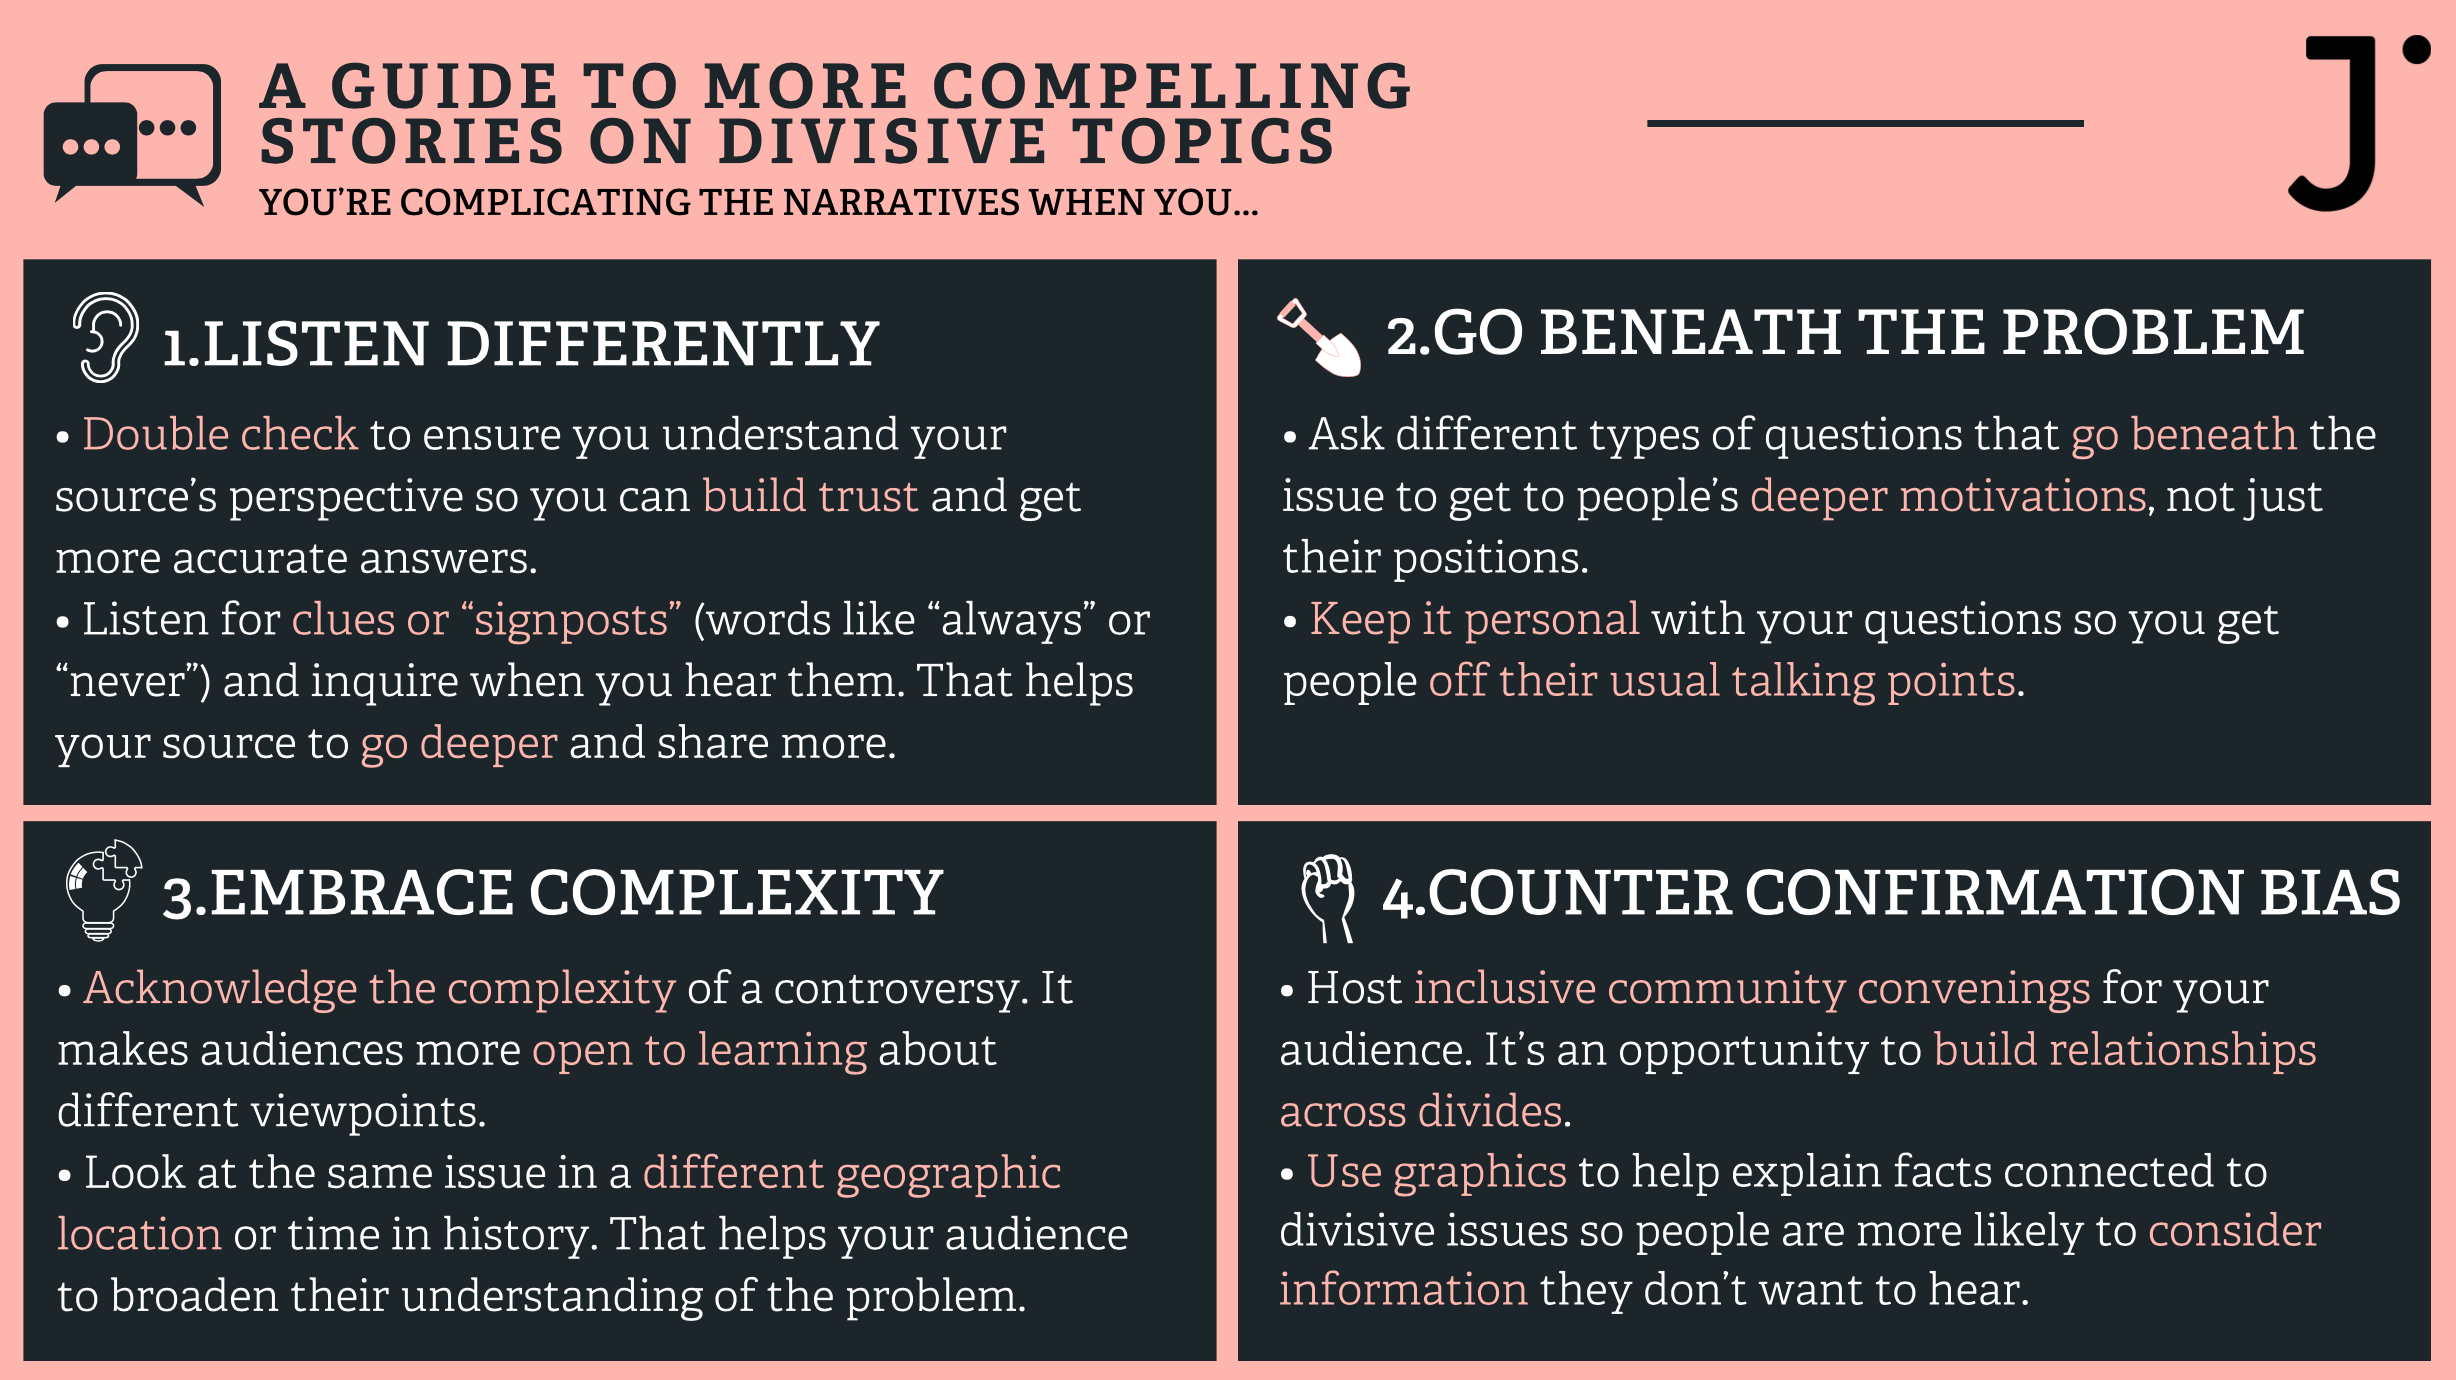 Guide to Compelling Stories infographic